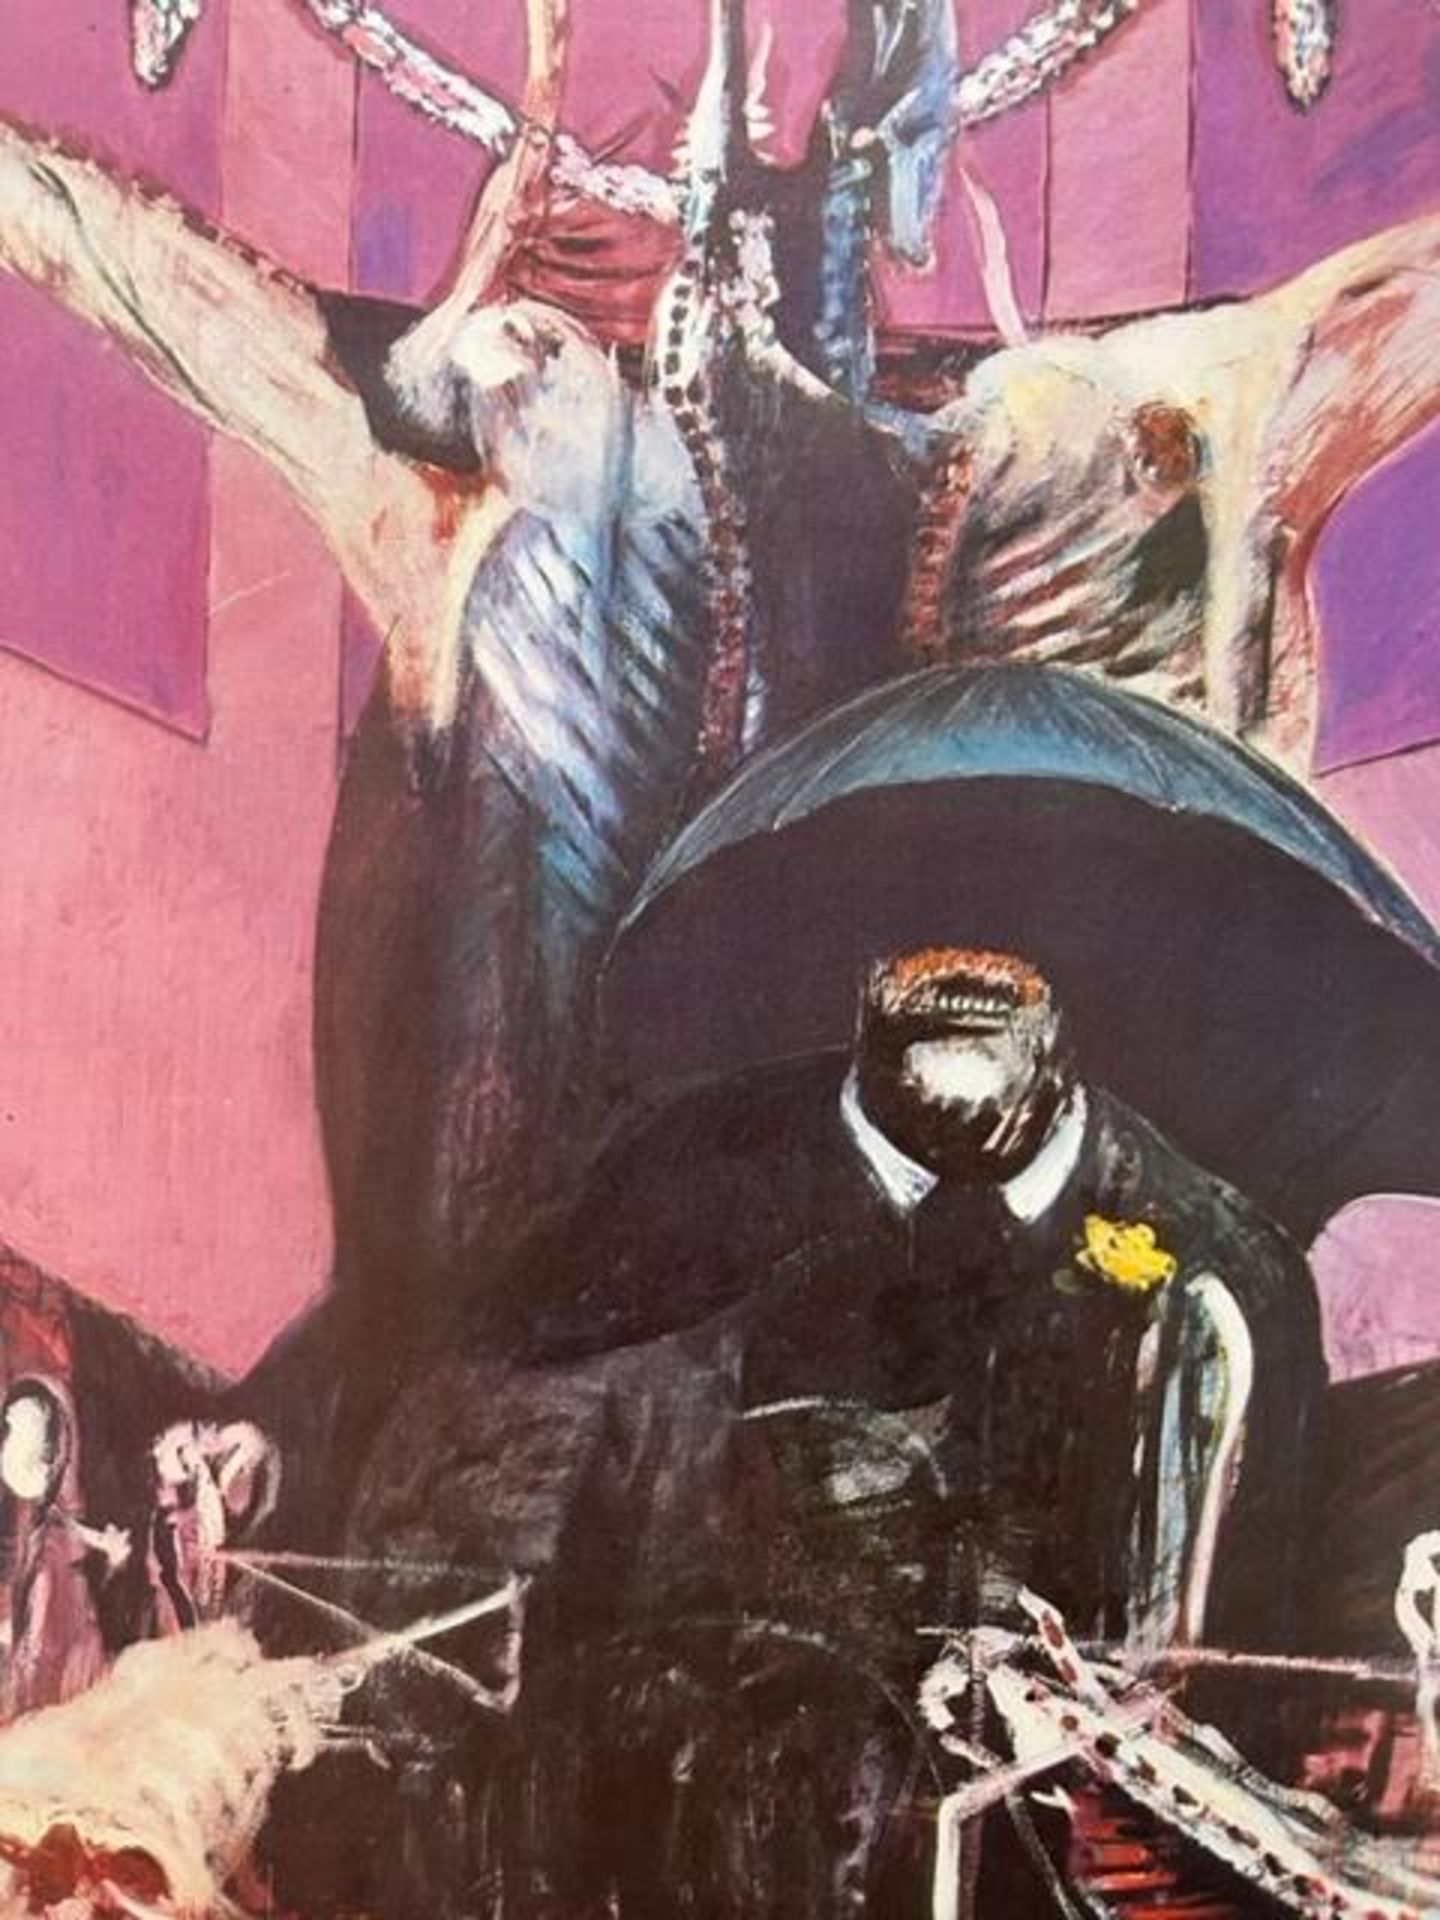 Francis Bacon "Painting" Print. - Image 5 of 12